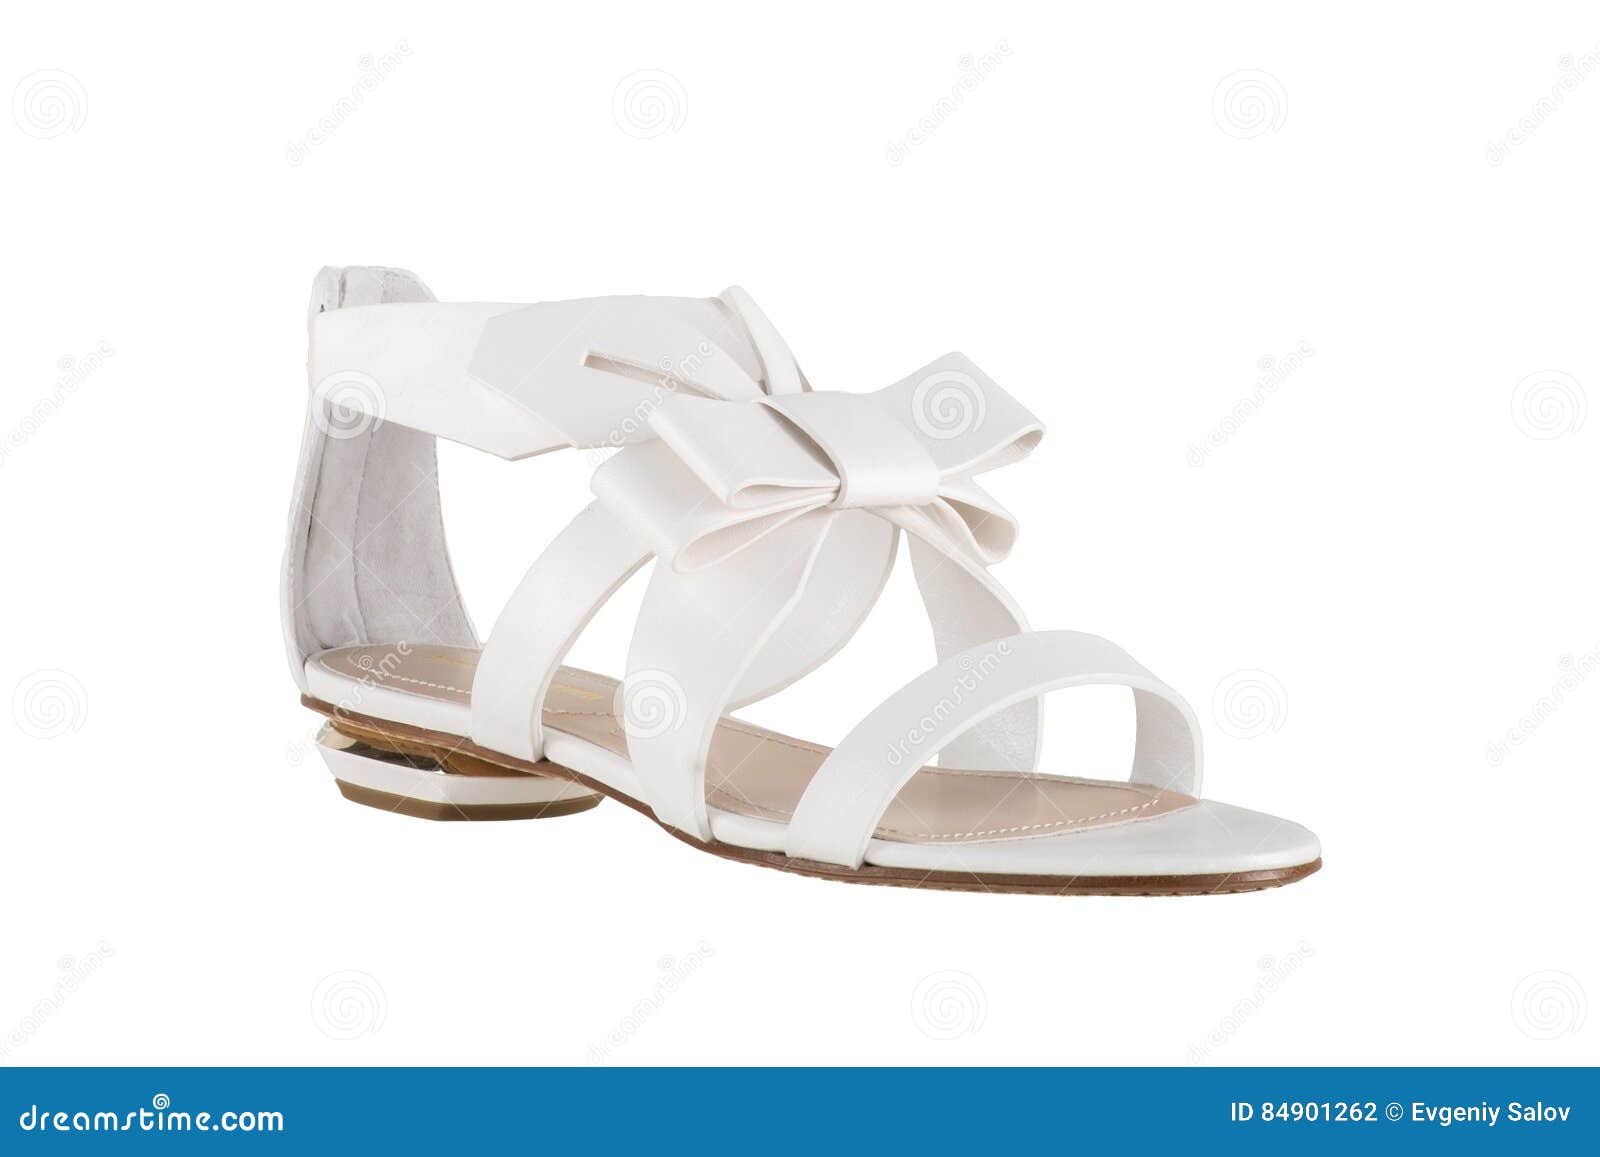 Women`s Shoes on a White Background. Premium Footwear Stock Photo ...